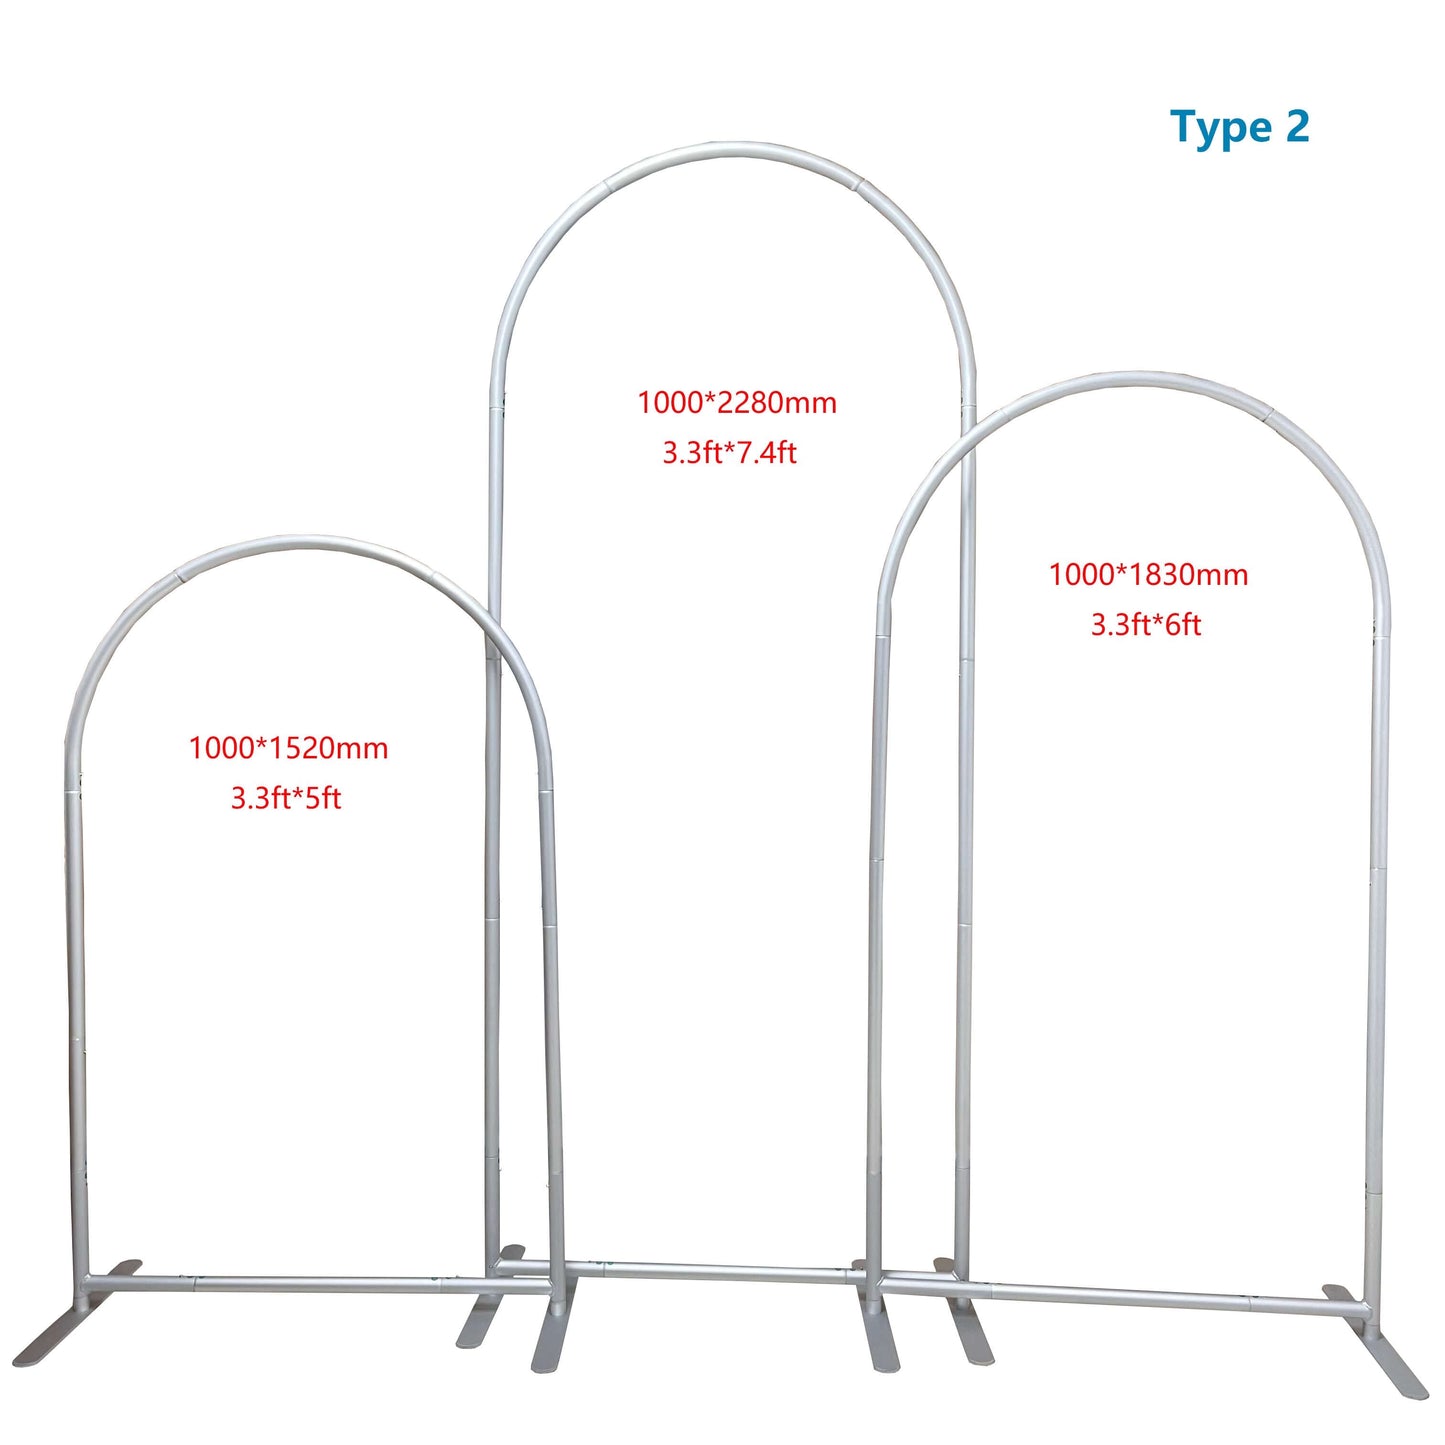 Chiara Arch Stand Rammer 5X7Ft Åpne 3X4Ft 4X7Ft 3.3X5Ft+3.3X7.4Ft+3.3X6Ft Stands Party Bakteppe